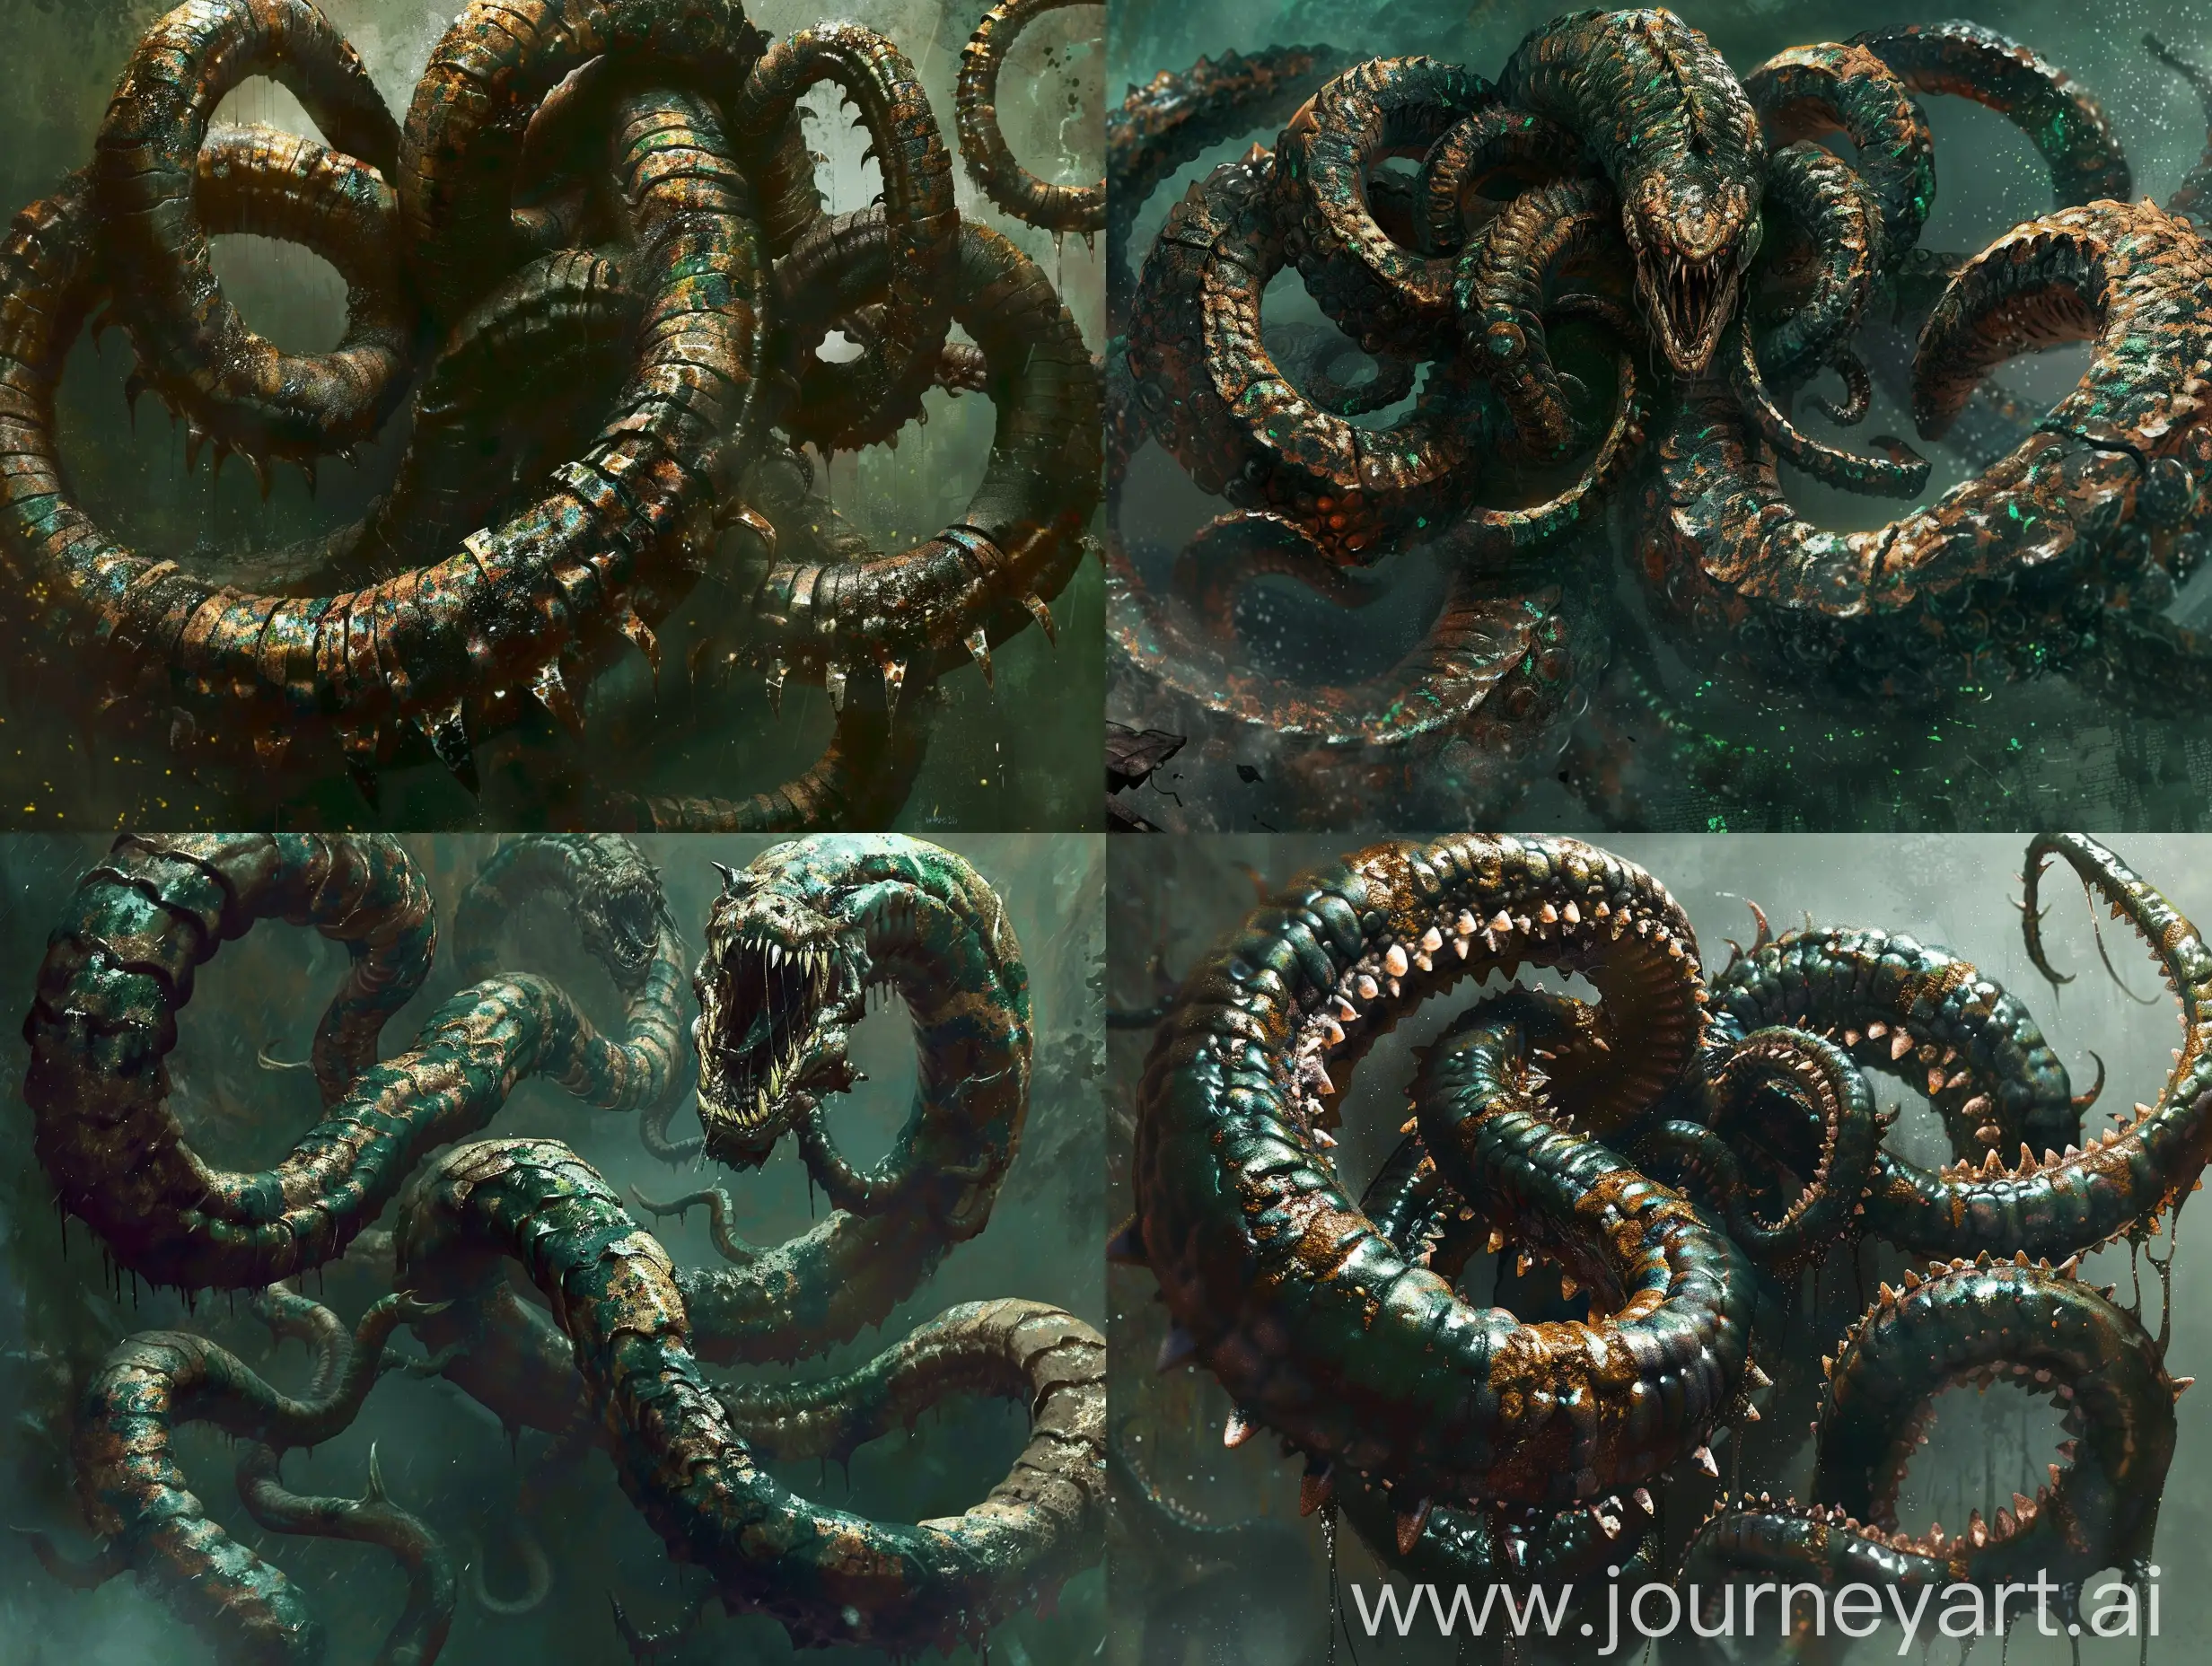 A scene of a Hydra - a colossal mass of flesh, muscle, and grotesquely twisted scales into countless spirals and rings. Each ring of the endless serpentine trunk measures several meters in diameter, rising in overlapping layers of rough, pointed scales. The scales vary in shades of deep green, rusted bronze, and ebony black, forming a demonic pattern of stripes and blotches that shimmer oilily.

Through the interstices of the scales, scarred tissue and dense musculature can be glimpsed, evidence of the creature’s supernatural resilience. Prominent ribs jut under the scaly skin, akin to bones from some ancient crypt. The body ends in a tail of colossal proportions, with a bifurcated tip forming two recurved caudal points covered with sharp bony spikes.

Multiple four heads rise on flexible necks covered with smaller scales. Each head is a terrifying sight, with long jaws resembling pitchforks filled with razor-sharp fangs dripping with bubbling venomous saliva.